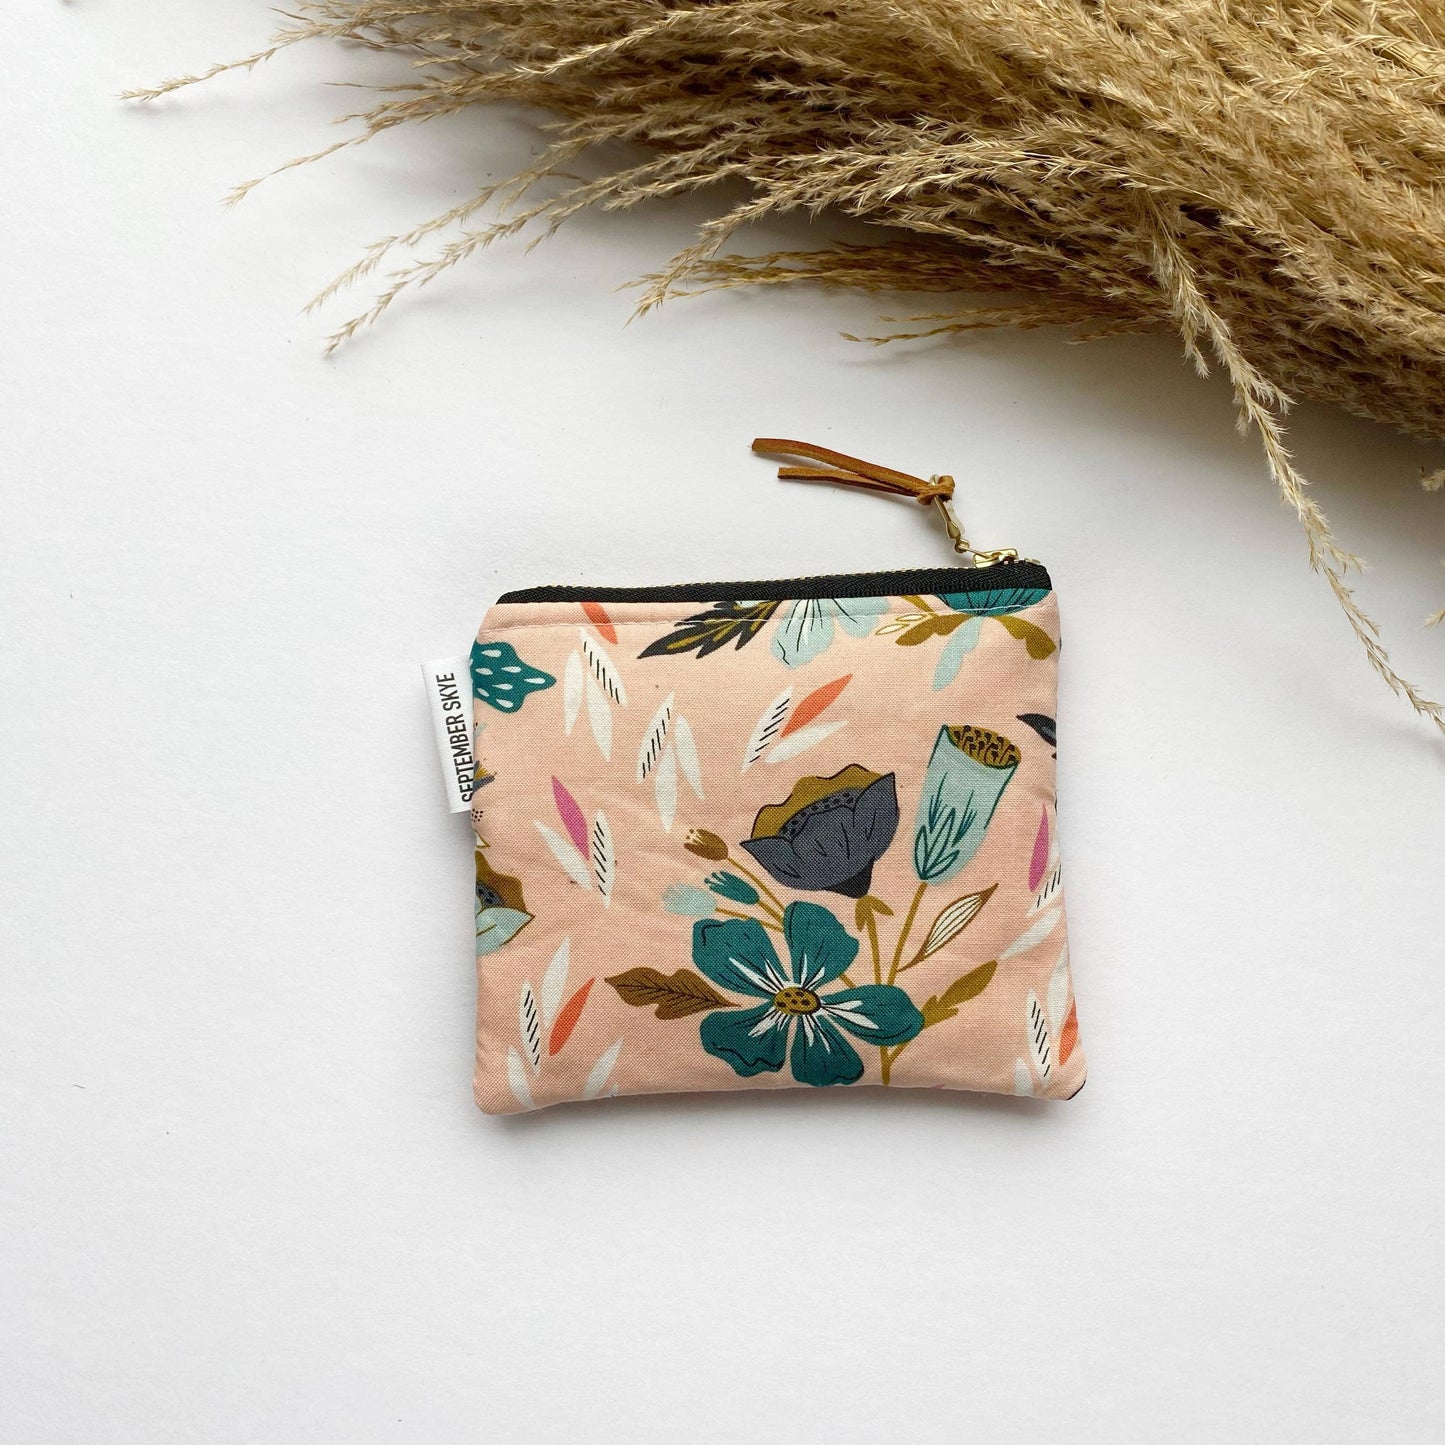 Small square pouch in light pink floral Spring-Summer September Skye Bags & Accessories